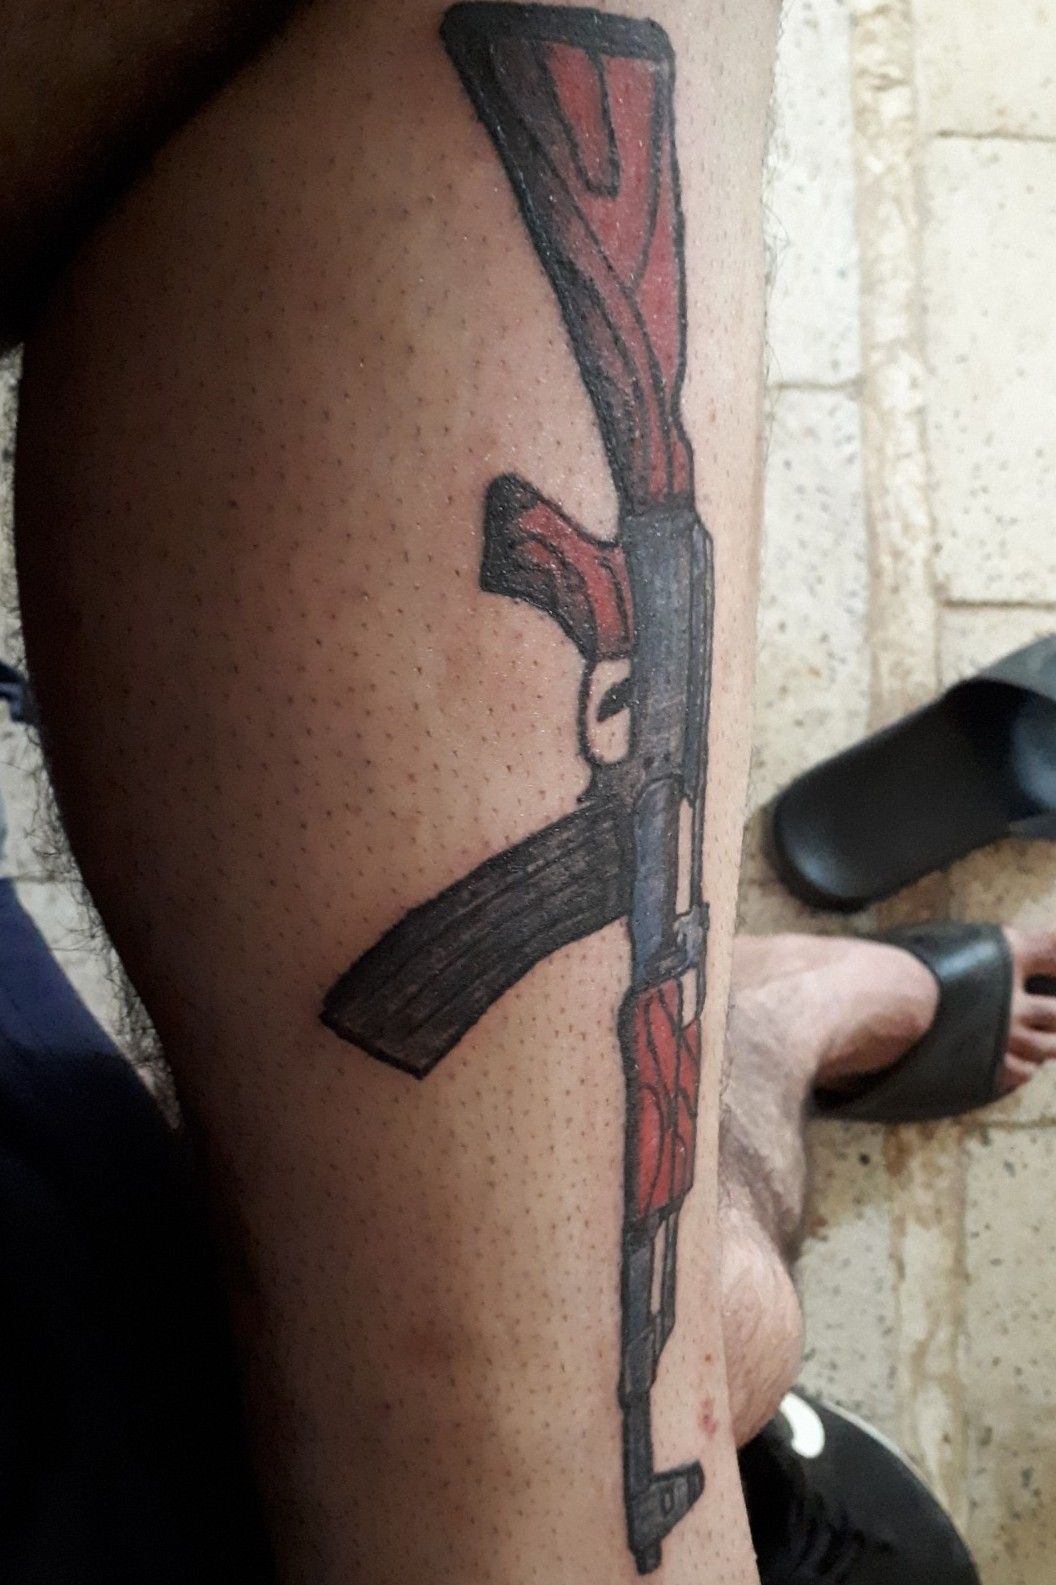 Singhaa Tattoo Studio  AK 47 GUN TATTOO ARTIST  singhaaworld  singhaatattoos     BOOK YOUR APPOINTMENT DM OR WHATSAPP  7426011169  Home Services Are Available Near By Your Place 